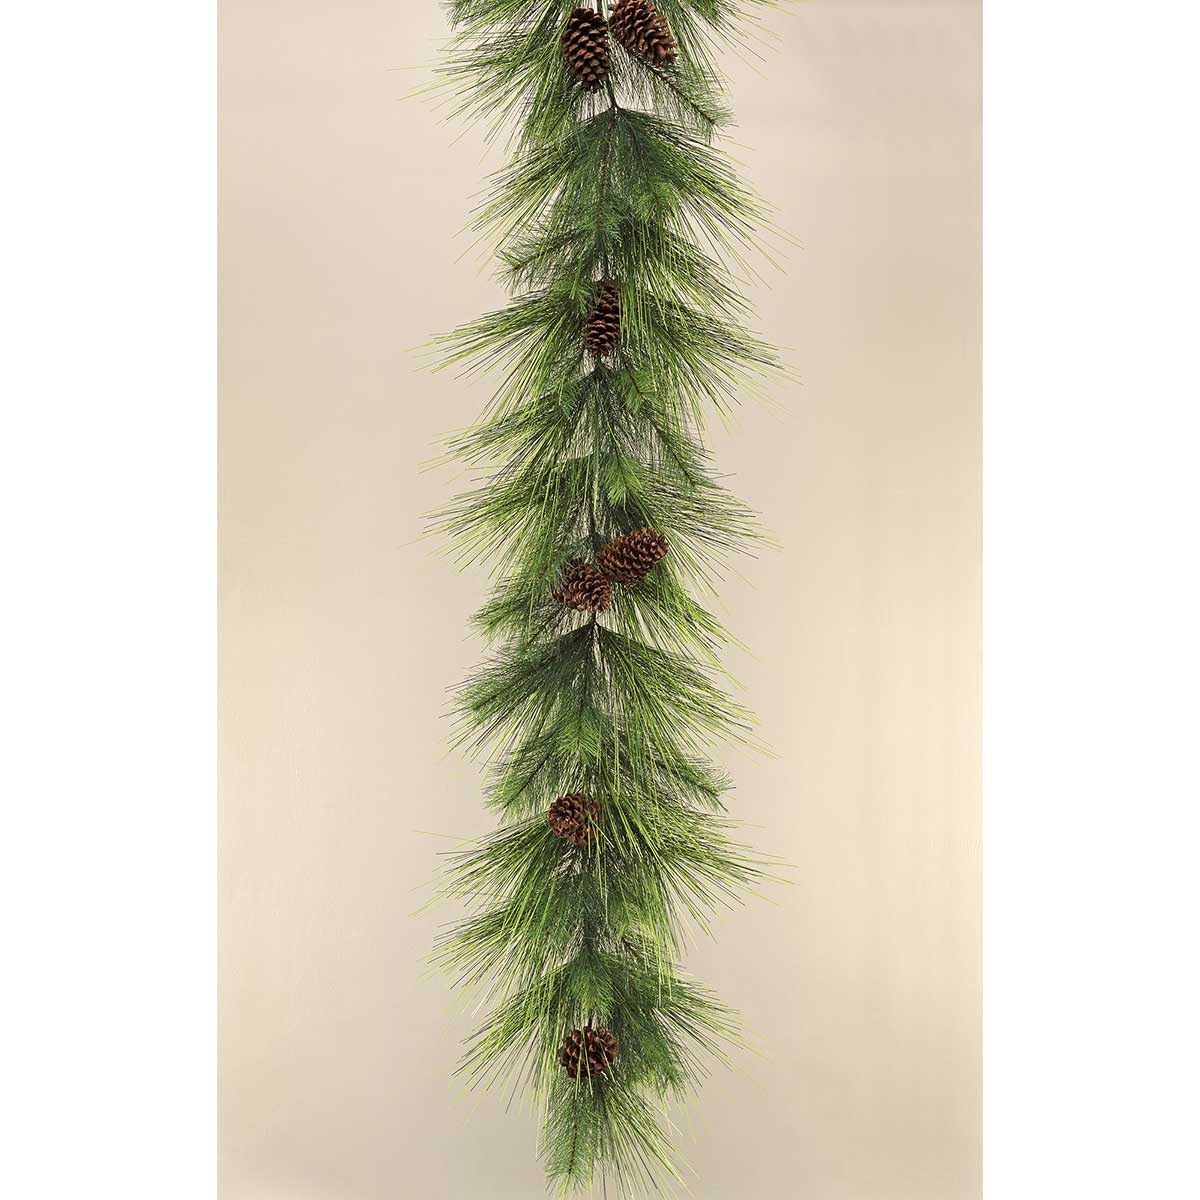 TWO-TONE LONG NEEDLE PINE GARLAND WITH PINECONES 12"X6'